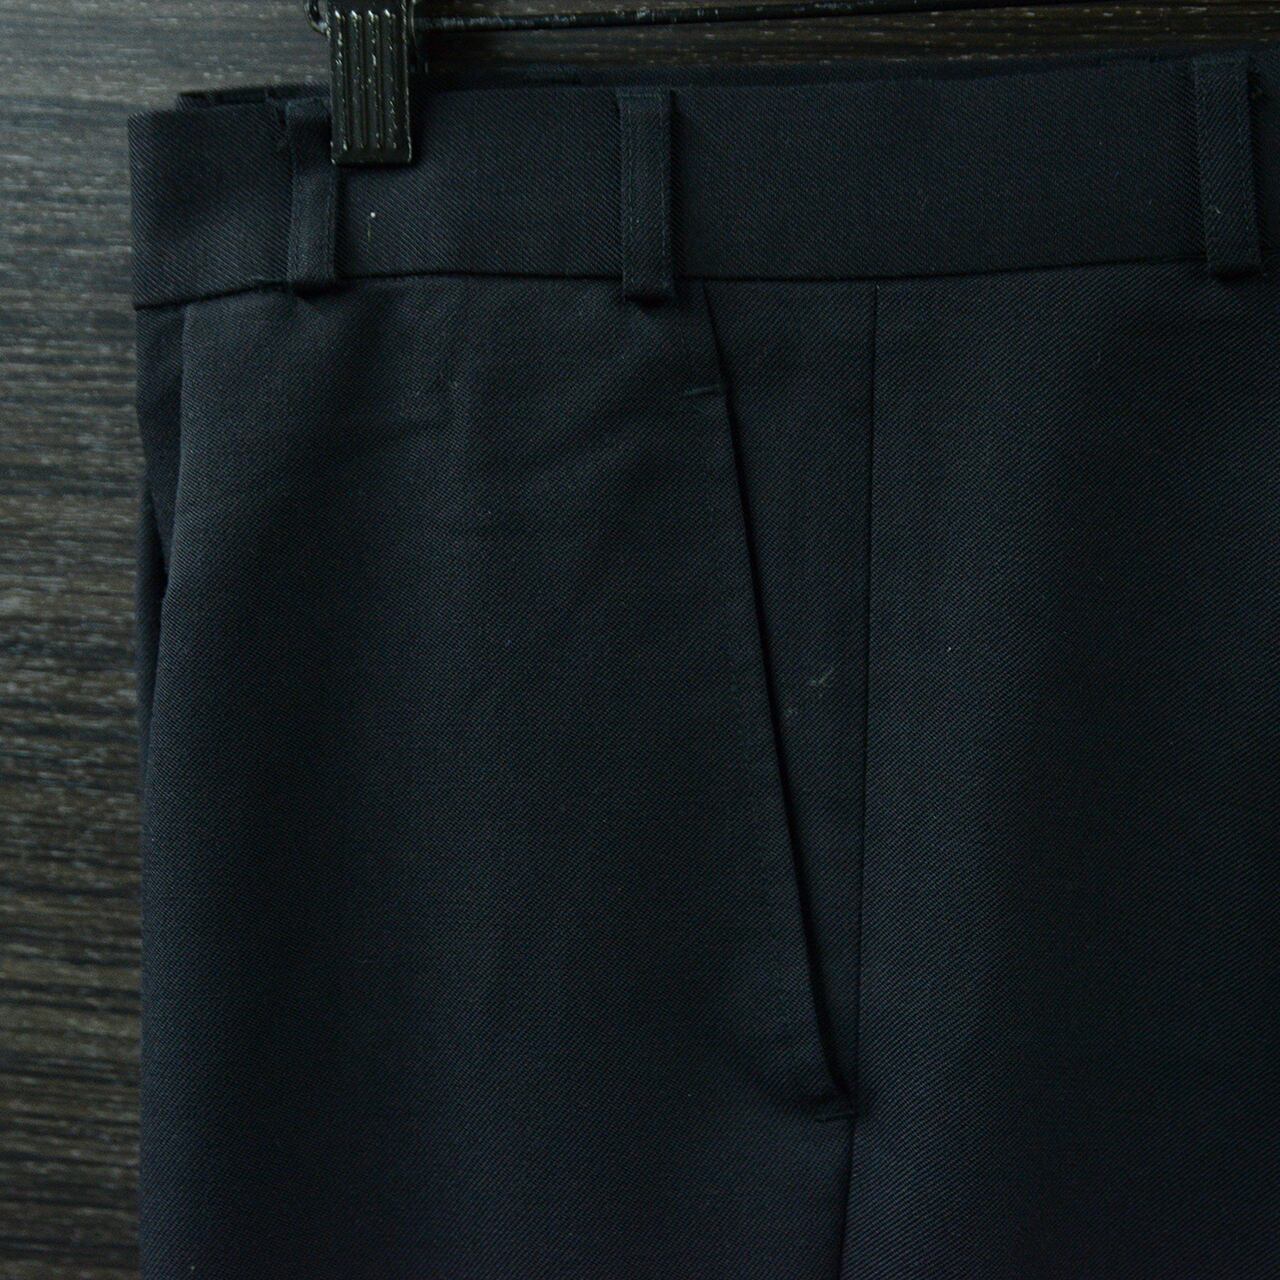 00109】British Army Royal Navy No.3 Dress Trousers 【REJECT 